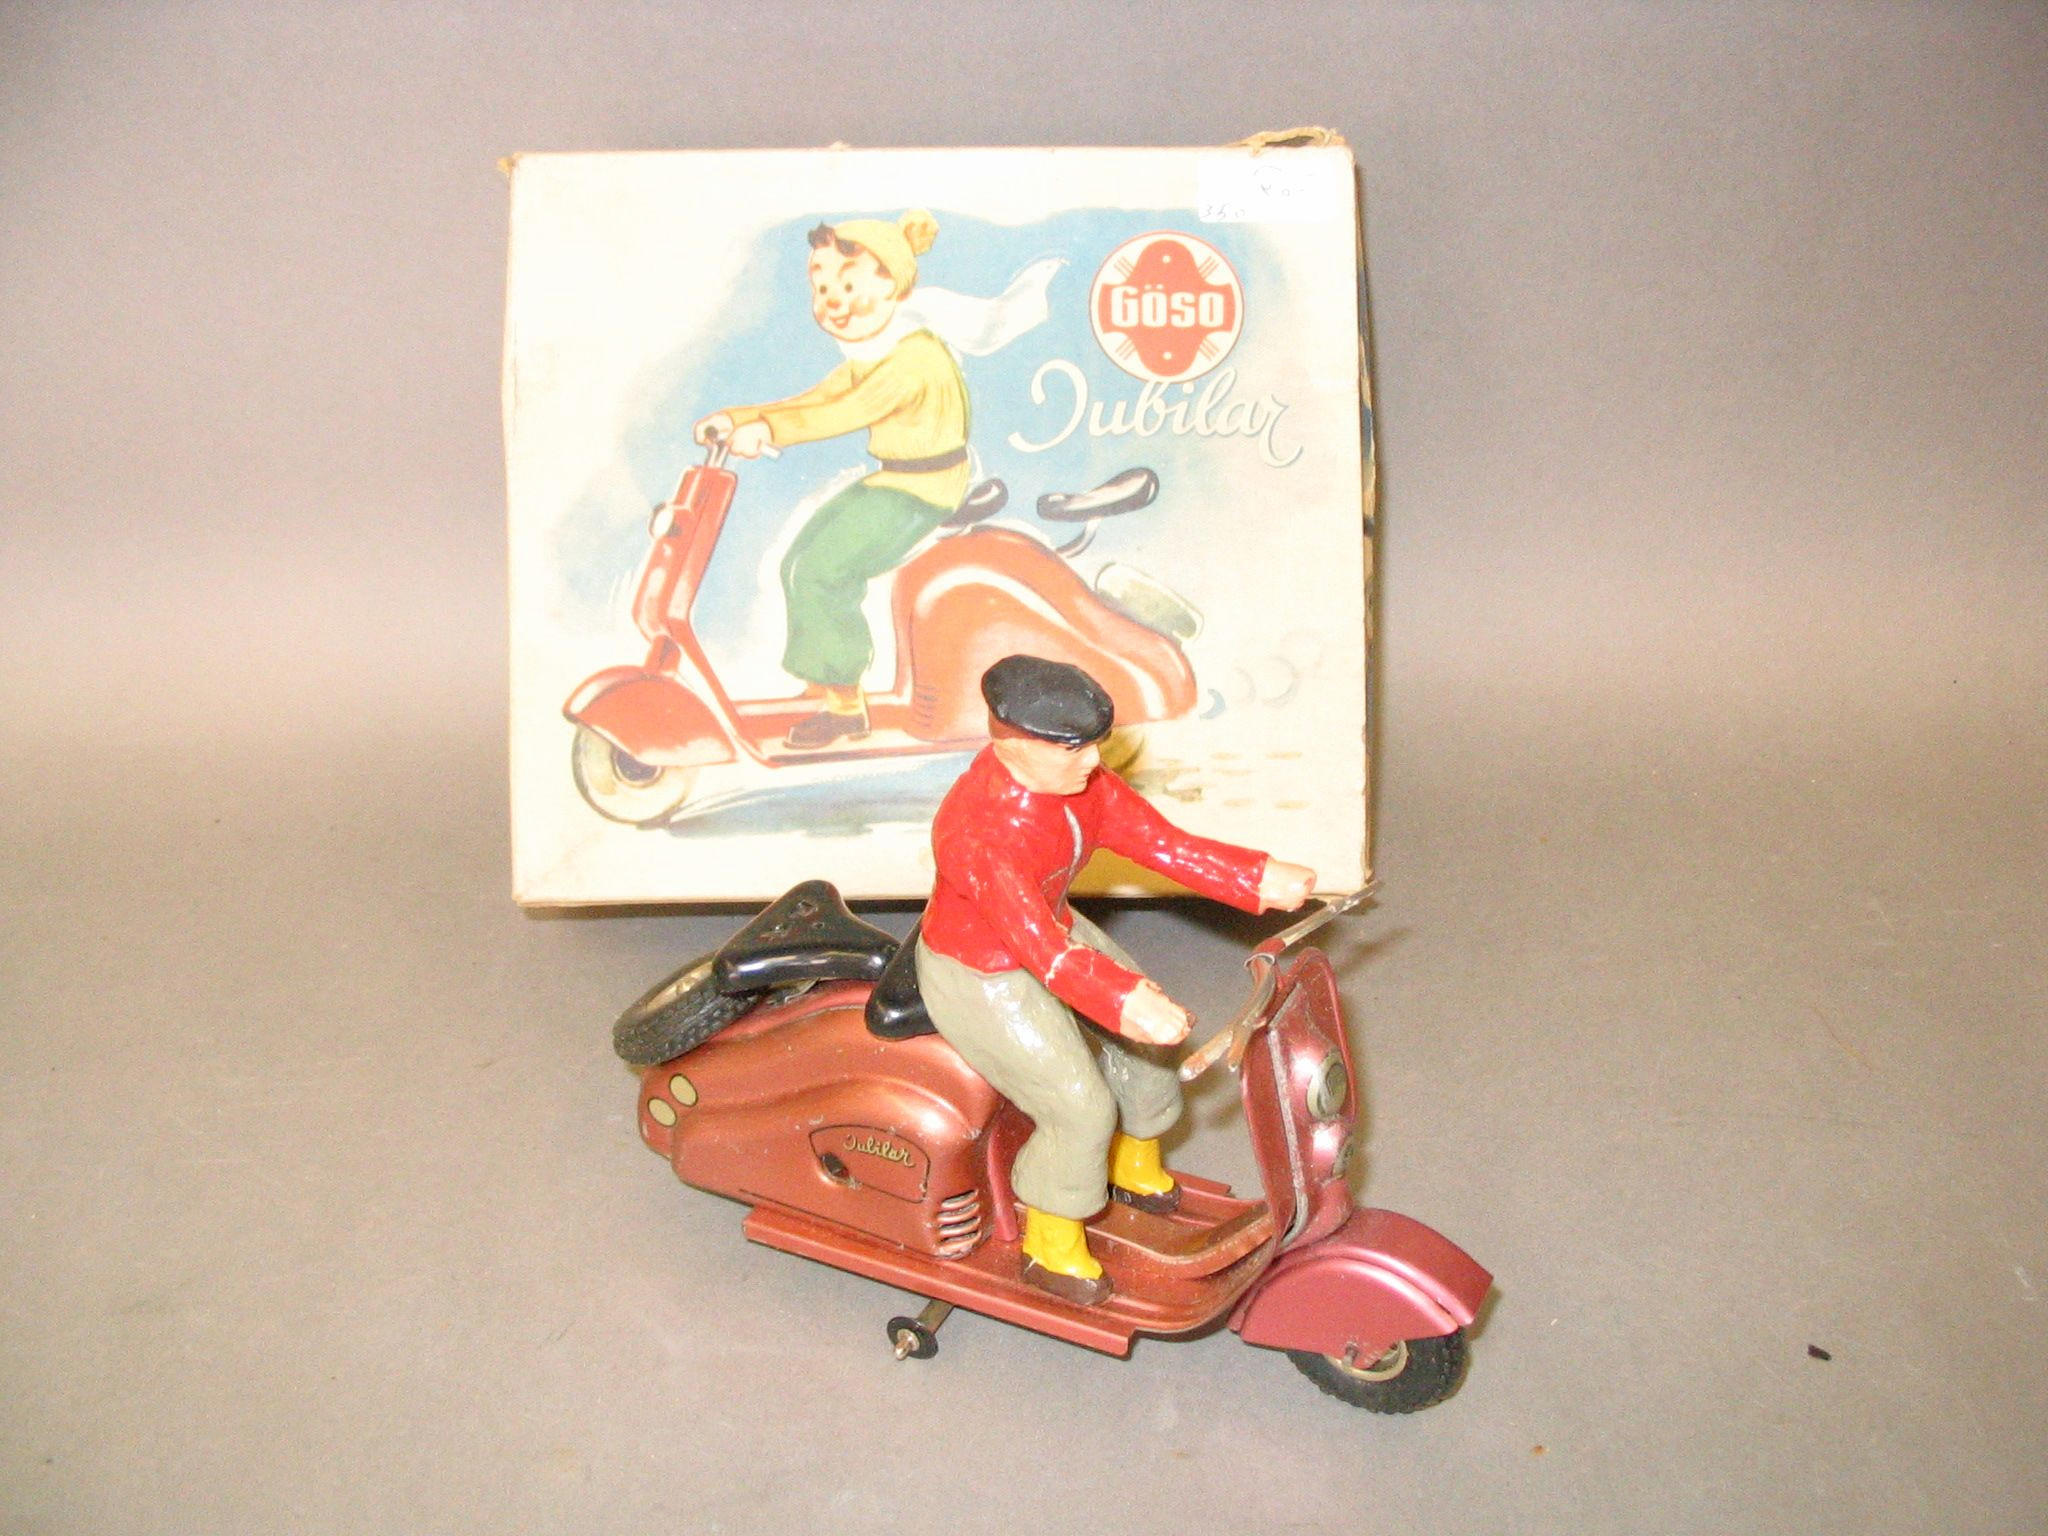 A Goso Jubilar c/w Scooter, German 1950s - auctions & price archive